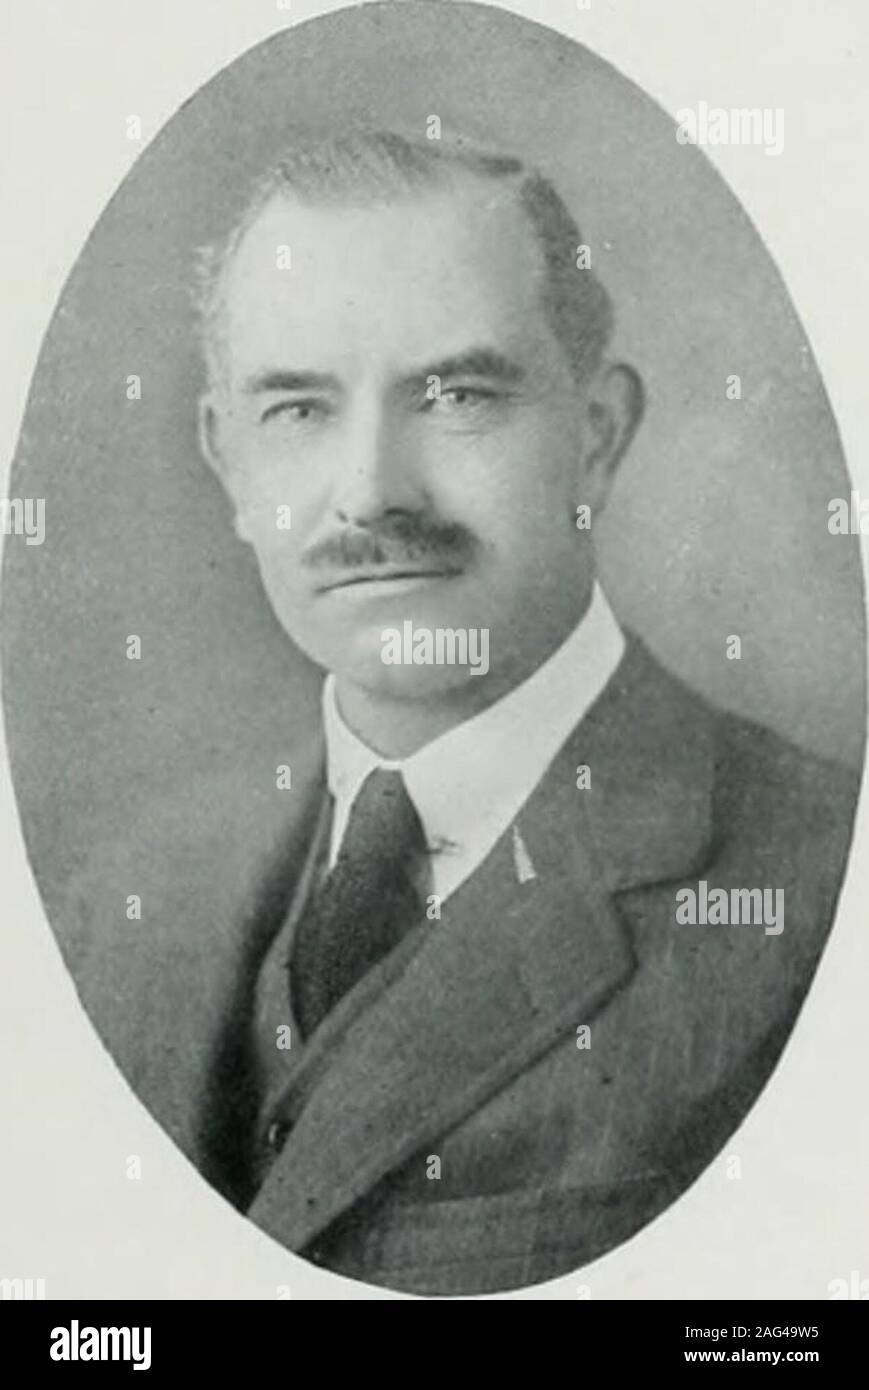 . Notable Londoners, an illustrated who's who of professional and business men. SIR HERBERT ALST1., K.H.E., MP. Chairman, The Austin Motor Co., Ltd., Sir Herbert has beenassociated with the Modern Motor Industry since its earliestdays. His first experience of engineering was obtained inAustralia, %vhence he came to Birmingham to superintendthe manufacture of machines for the Wolseley Sheep Shear-ing Machine Co. When the firm undertook the manufactureof .Automobiles Sir Herbert (then Mr.) Austin drove theirfirst car through the 1,000 mile trial of the AutomobileClub of Great Britain and Irelan Stock Photo